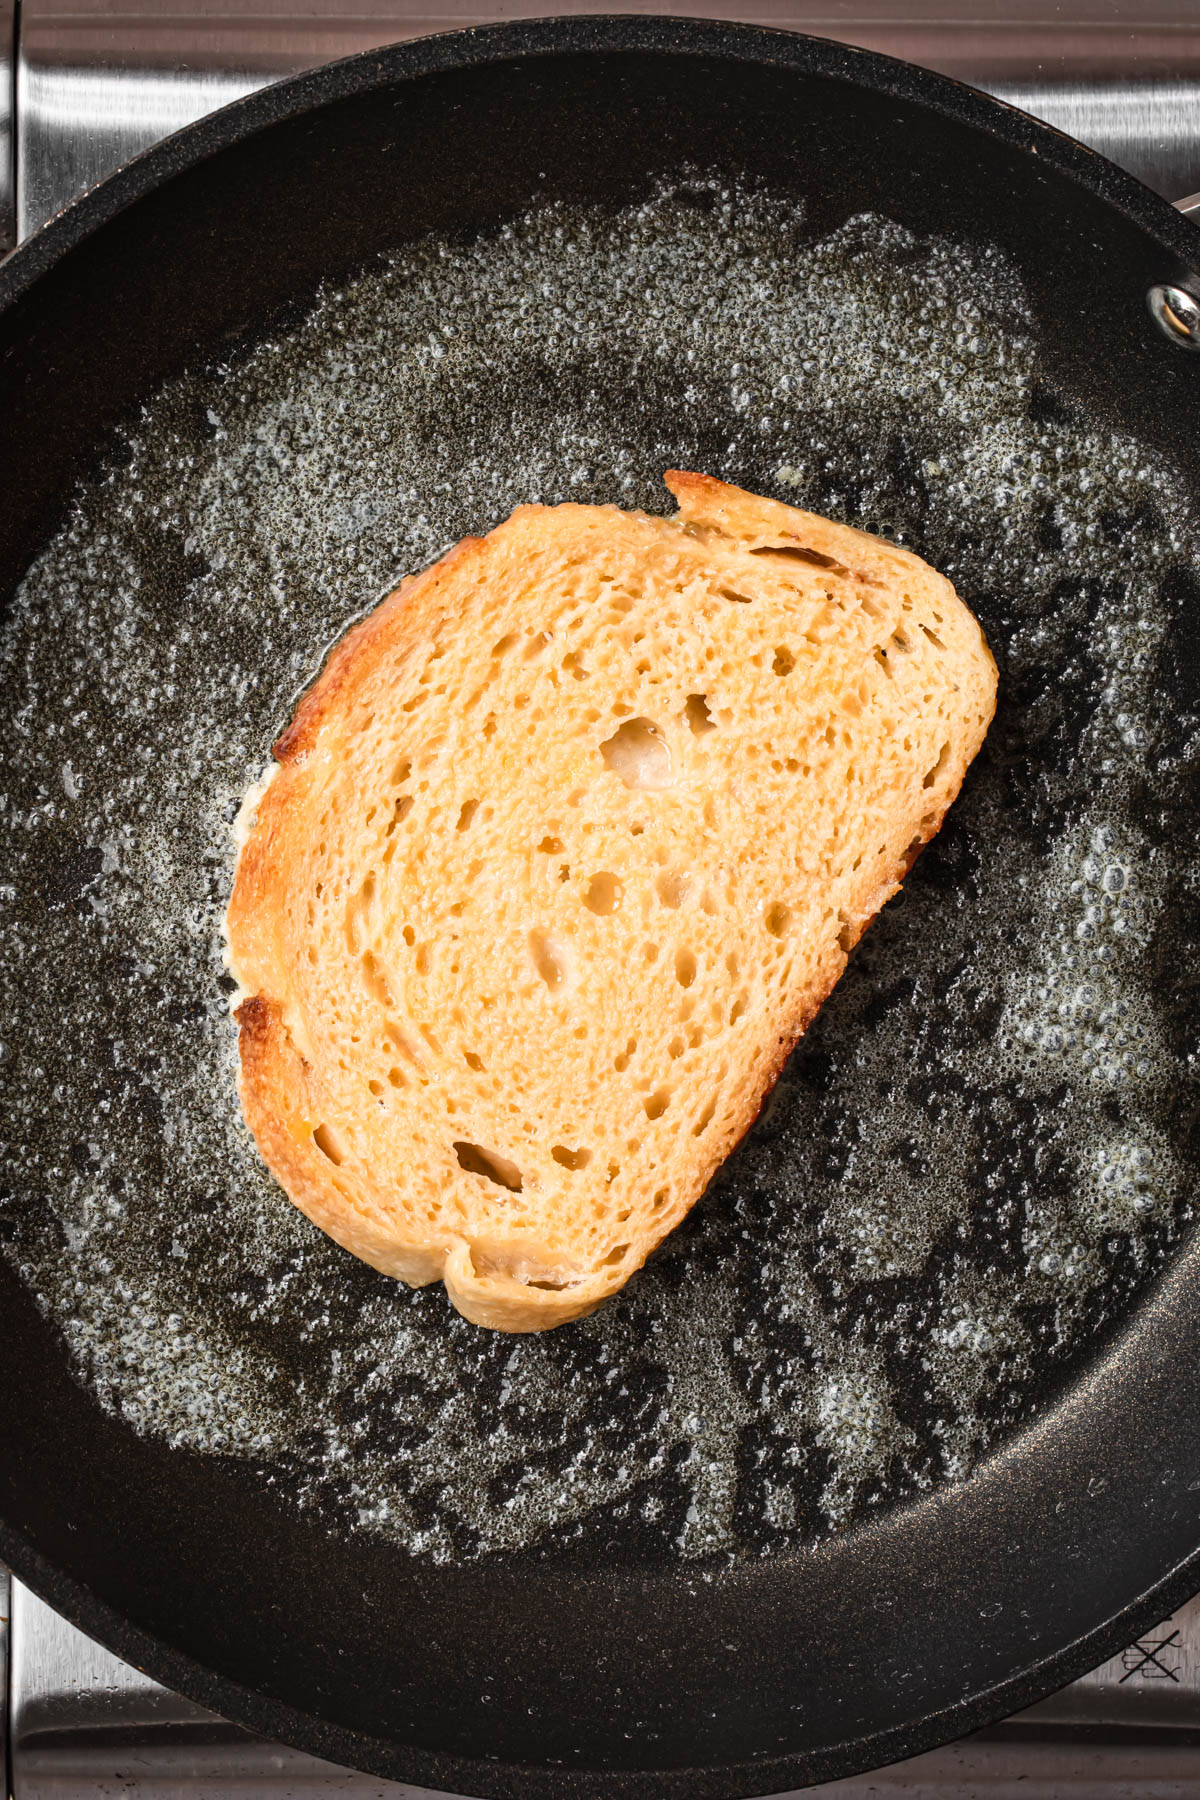 A slice of egg soaked bread added to a hot skillet.